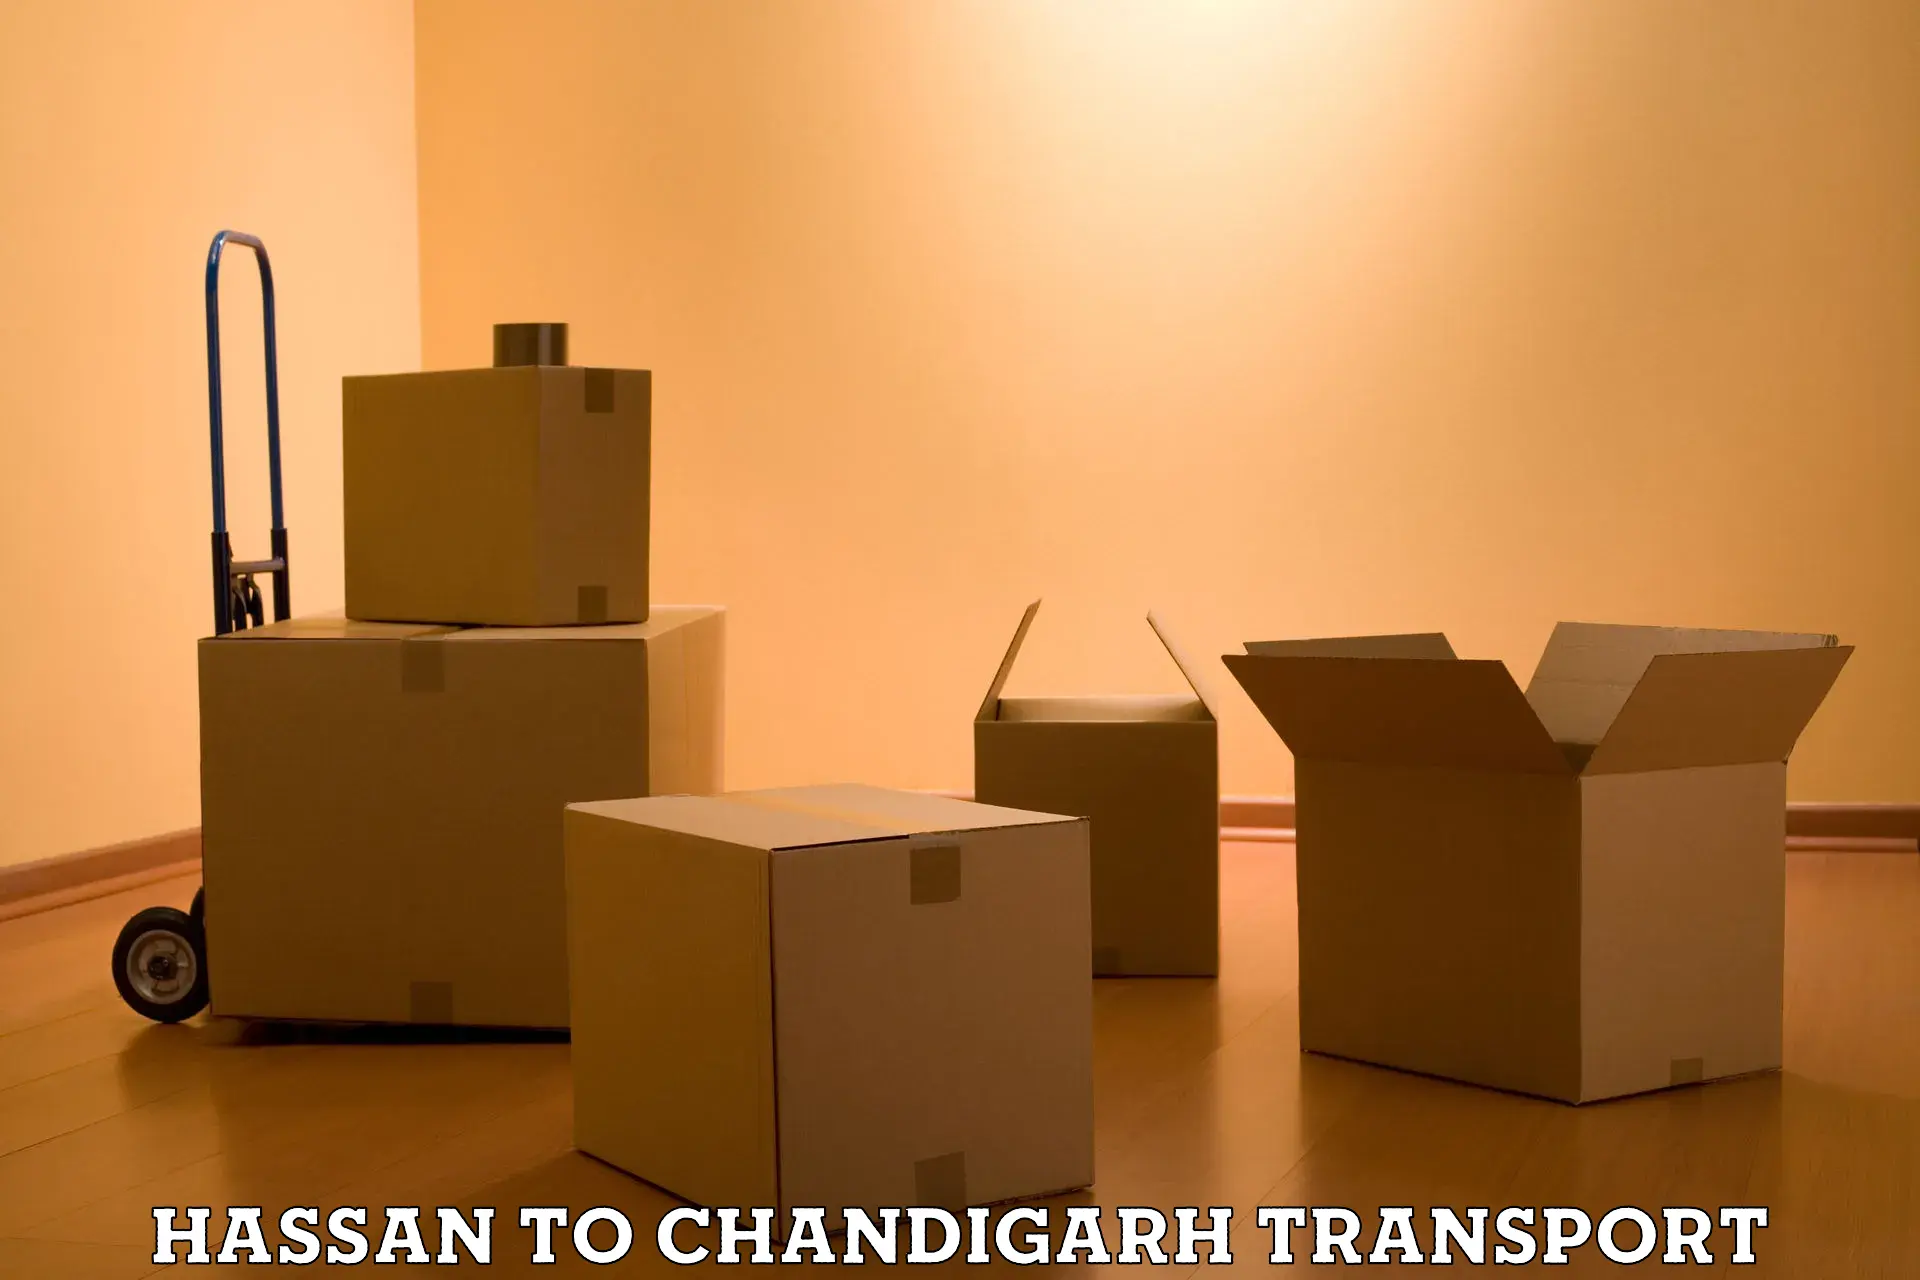 Express transport services Hassan to Chandigarh